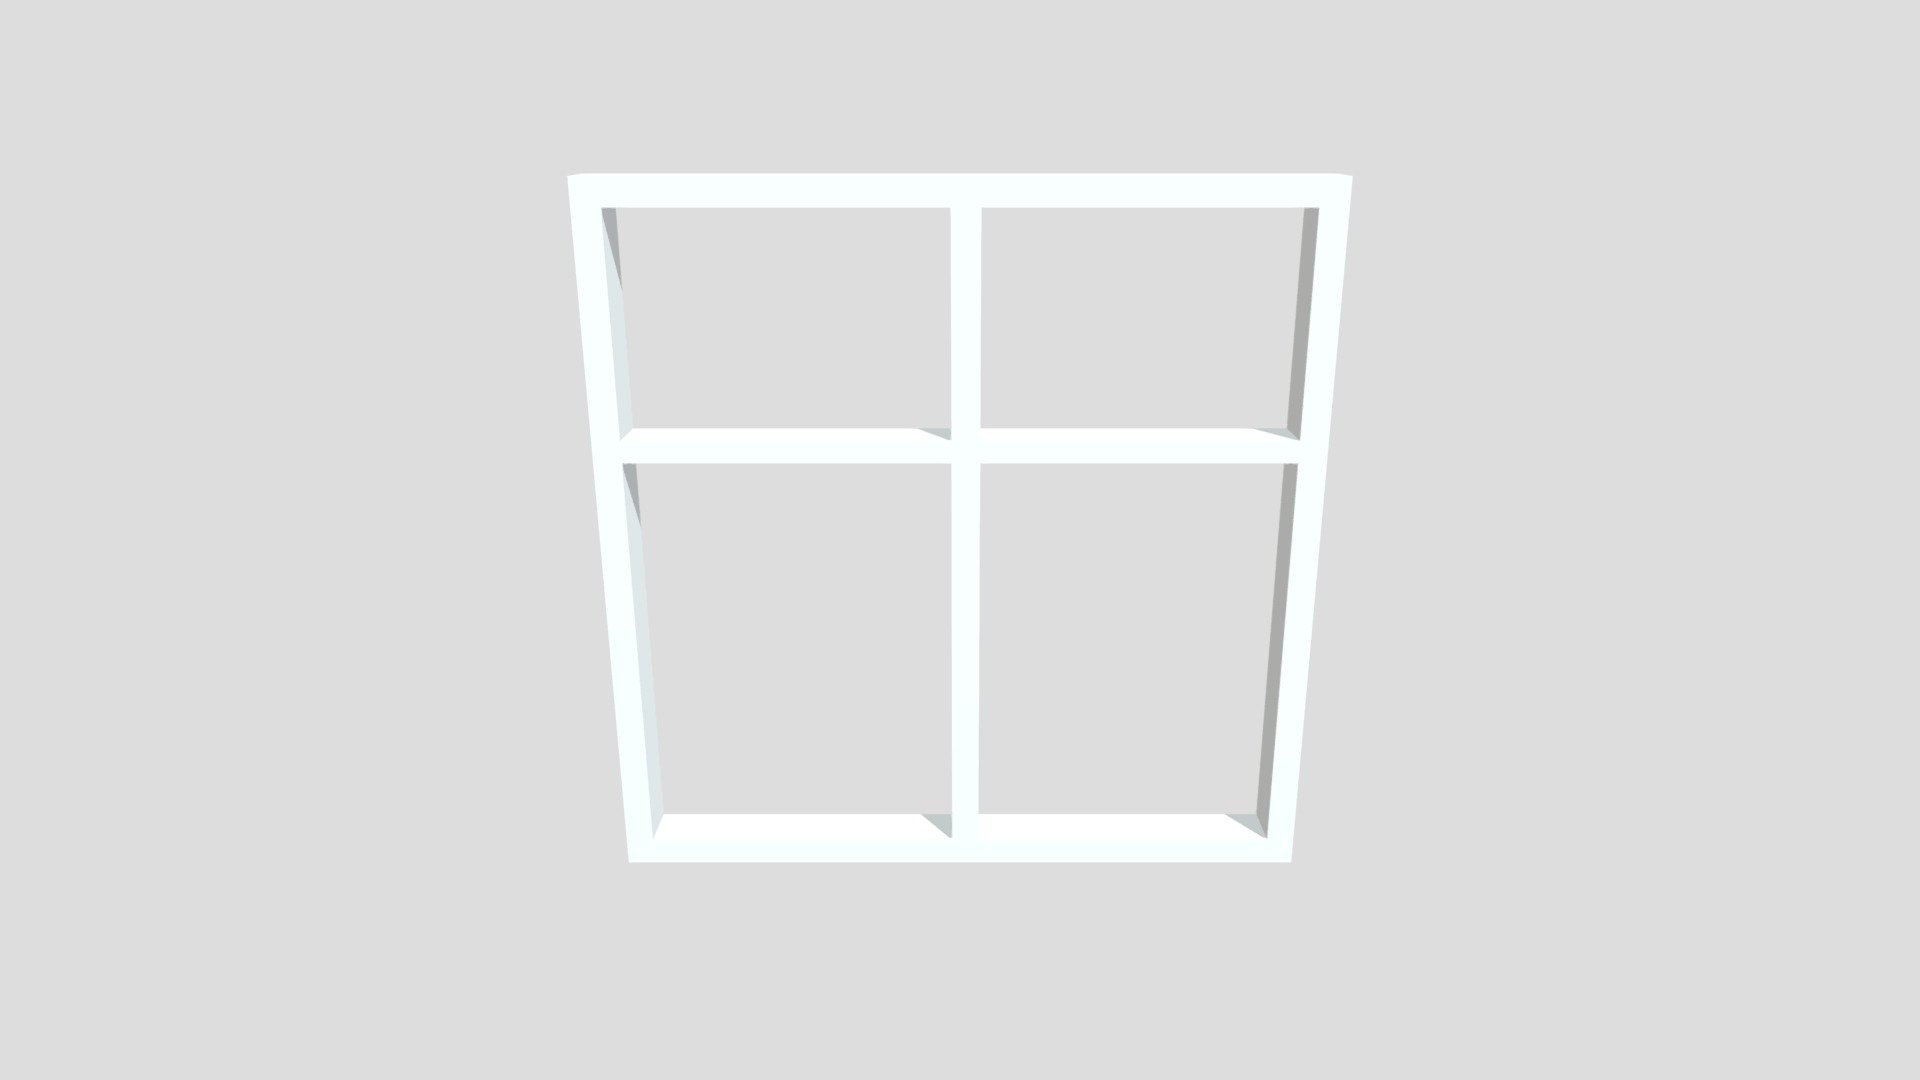 Super simple window in your life! - Window - Download Free 3D model by wowic 3d model